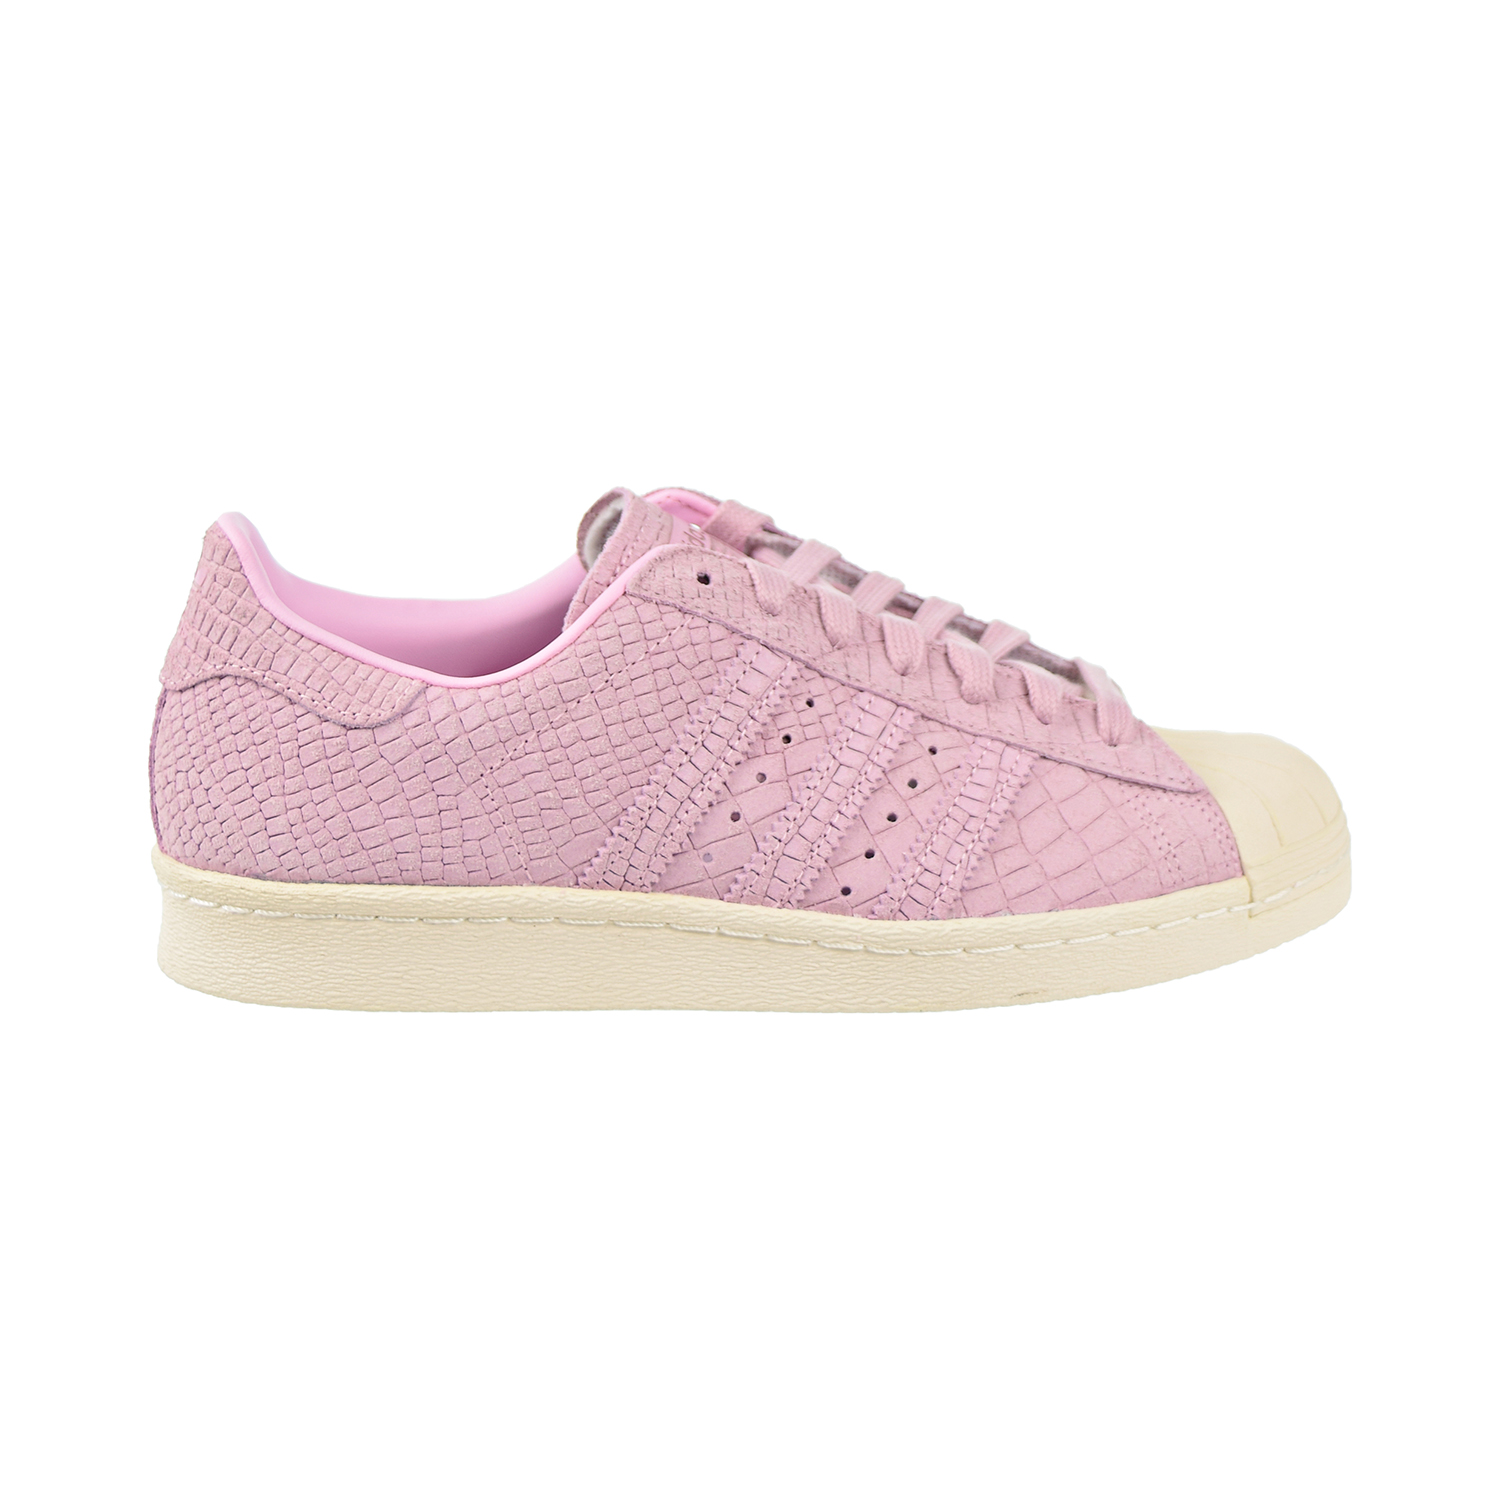 Adidas Superstar 80s Womens Shoes 